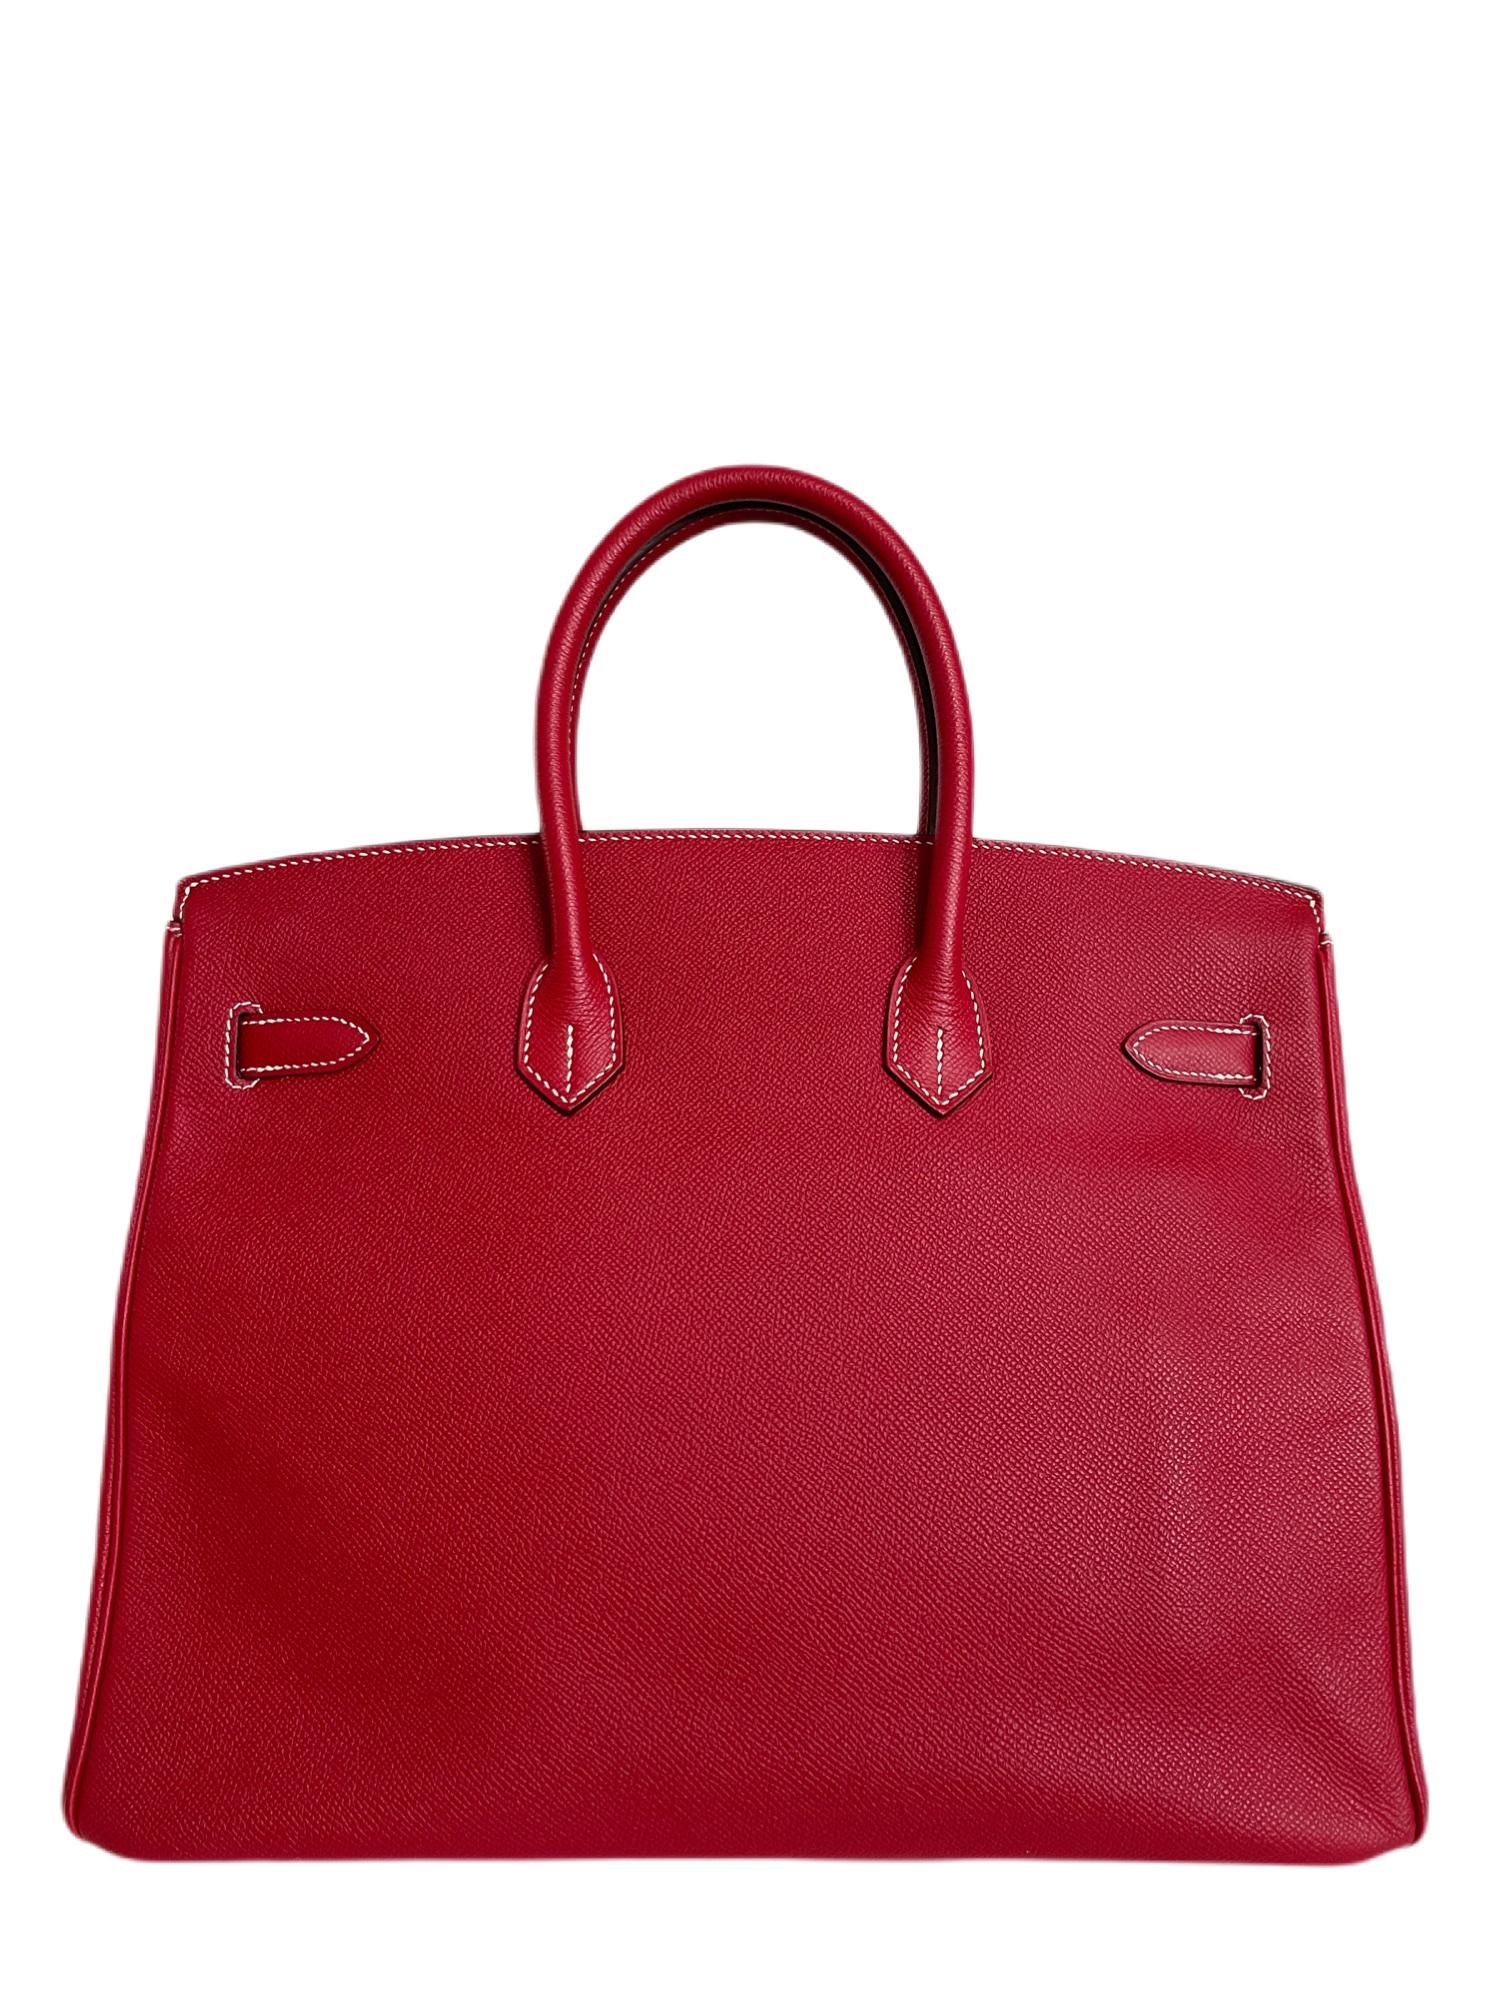 This authentic Hermes Candy Rouge Epsom 35 cm Birkin is in pristine unworn condition.  The protective plastic remains intact on the Permabrass hardware.
Durable and textured Epsom leather absorbs this breathtaking shade of deep berry beautifully. 